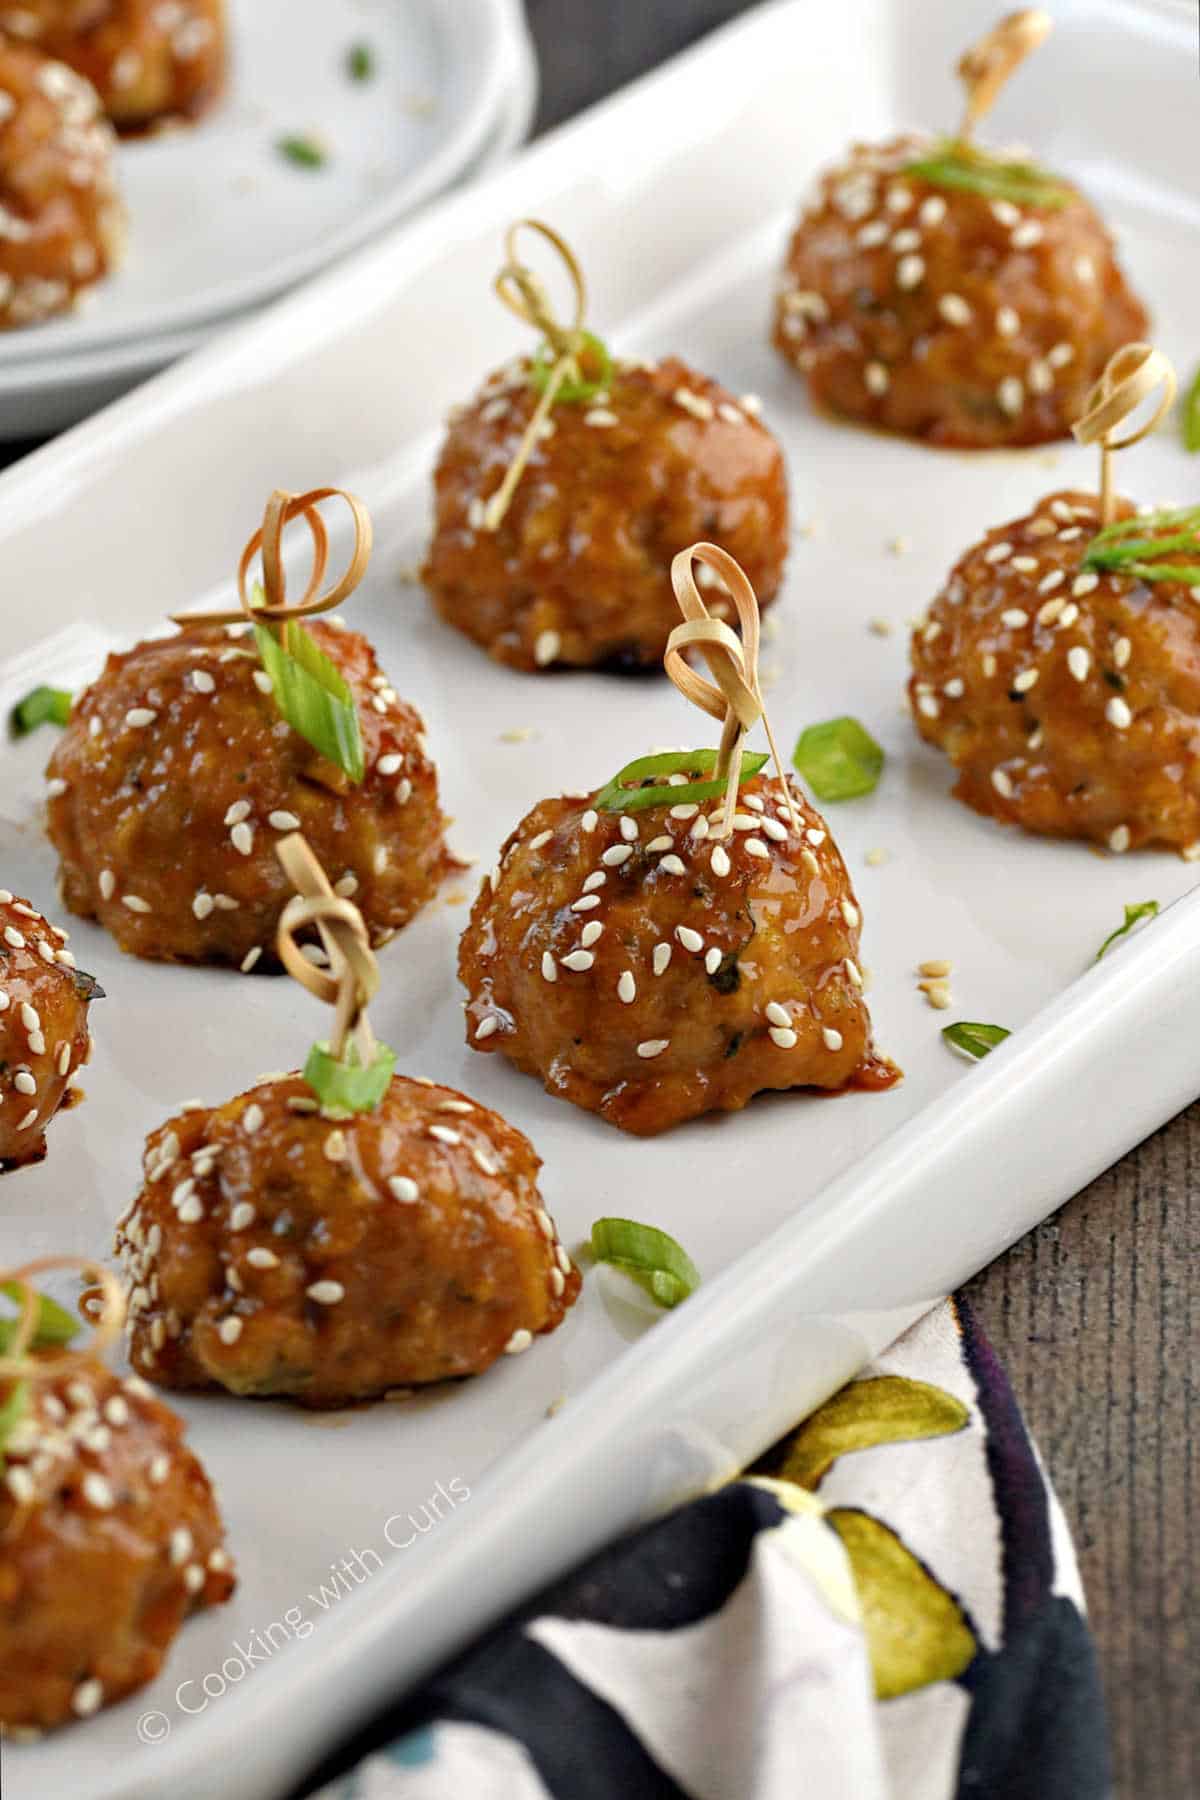 Chicken teriyaki meatballs on a platter with sesame seeds and green onion slices.